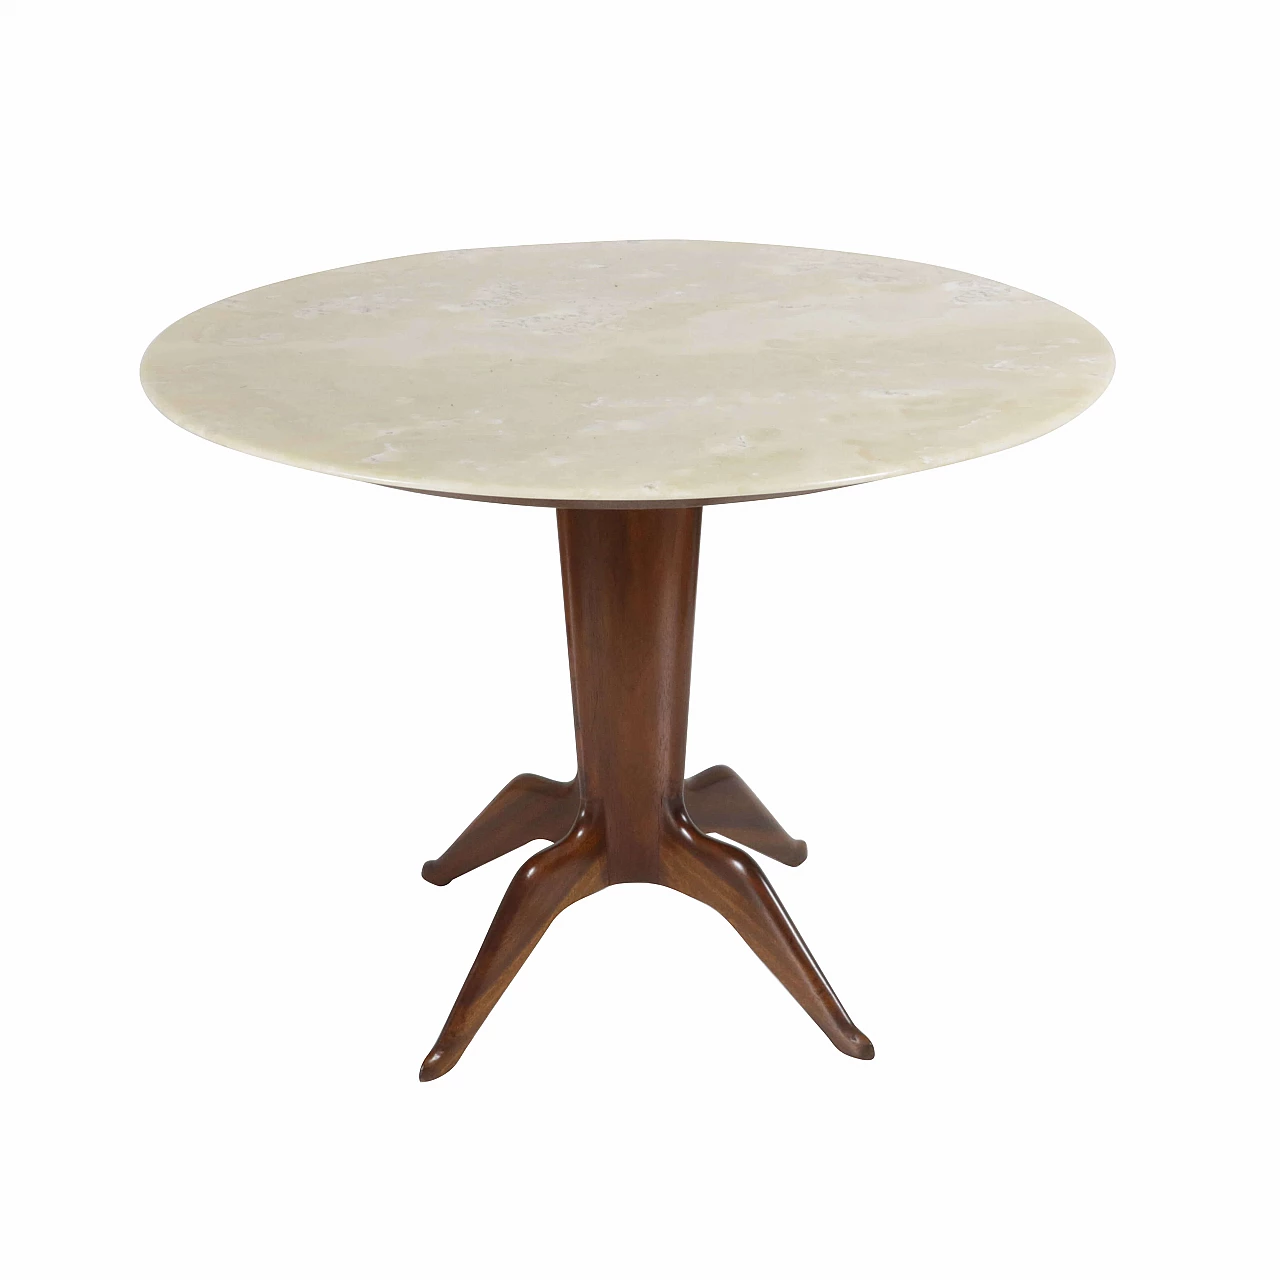 Table with onyx top, 1950s 1270186